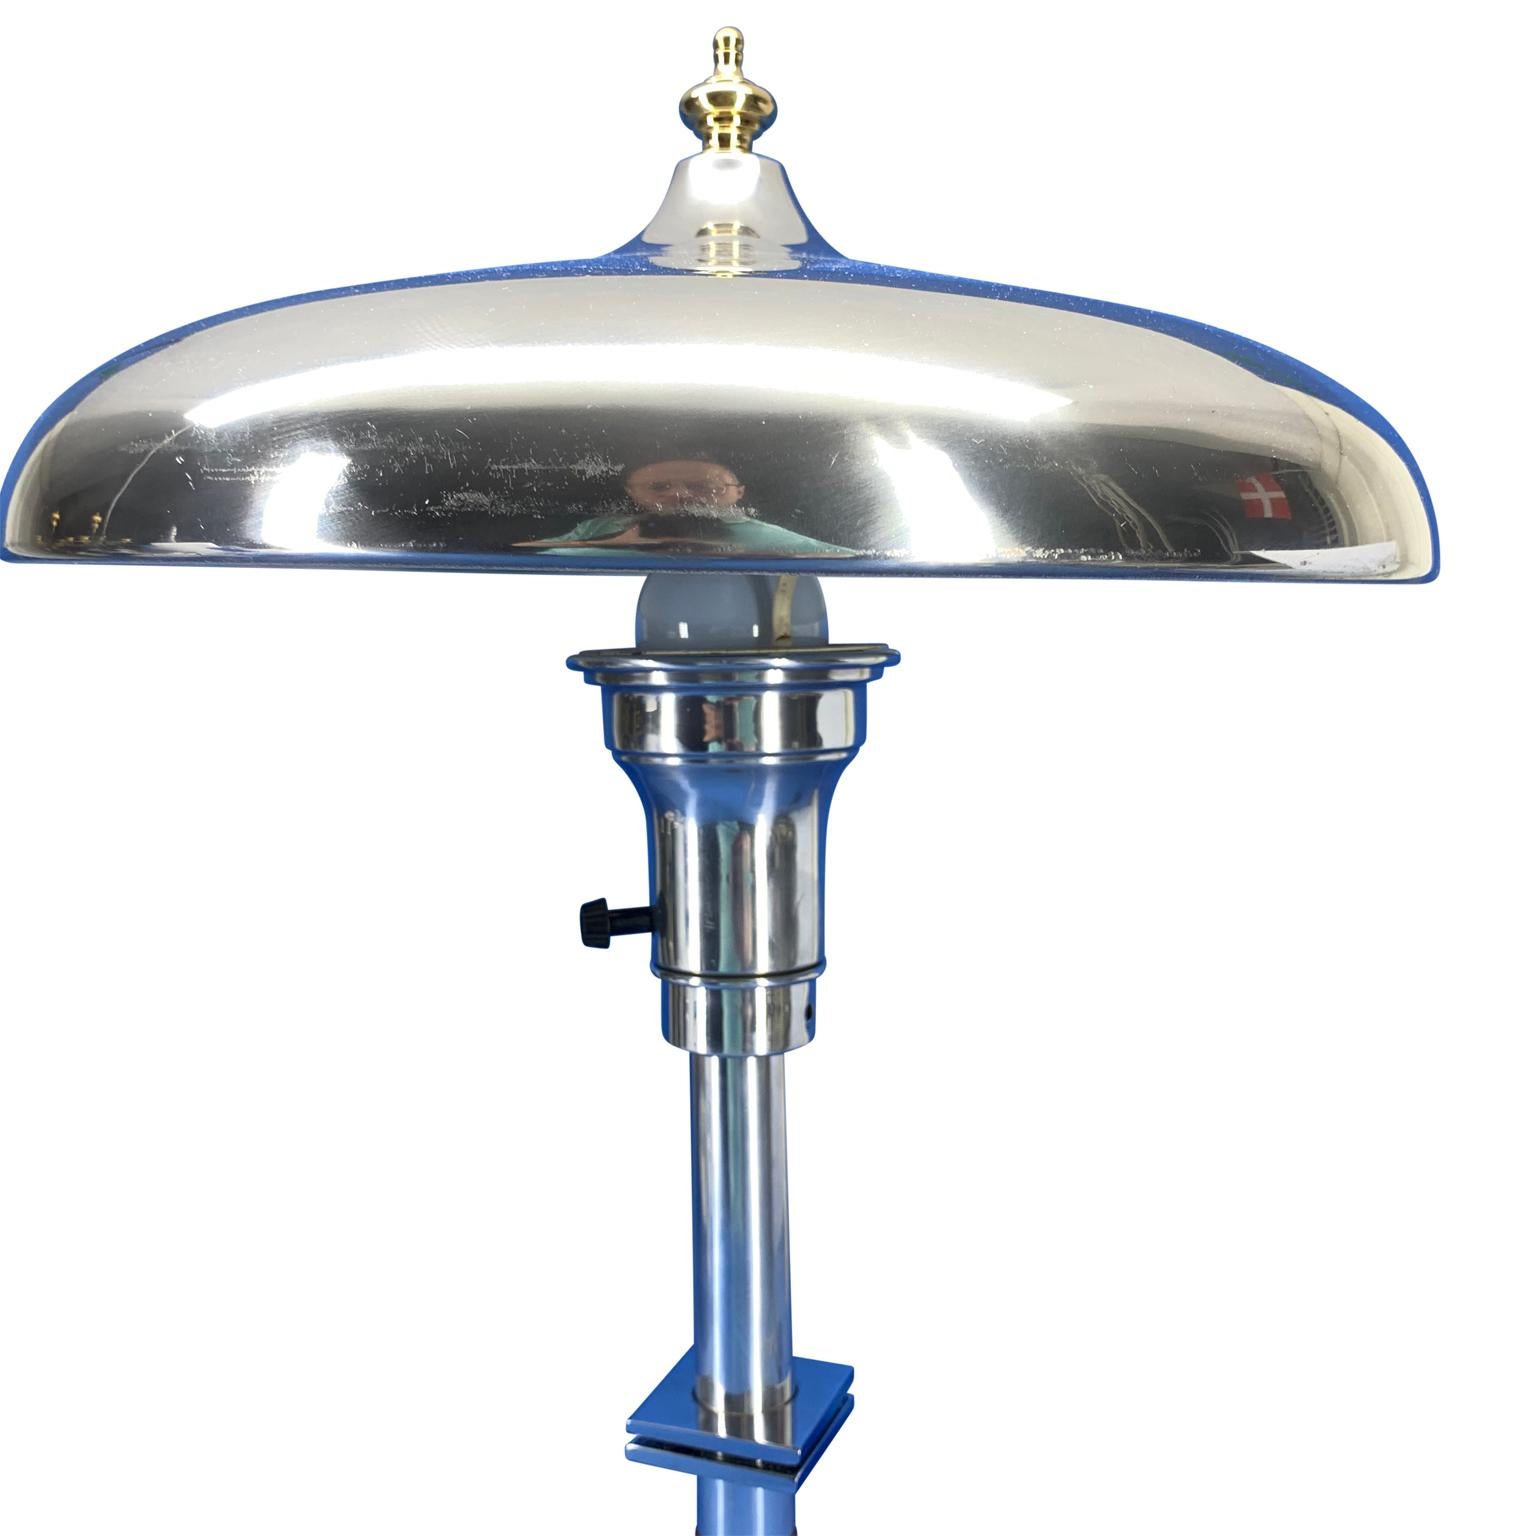 Scandinavian Art Deco Table Lamp With Chrome Shade And Solid Brass Finial 1